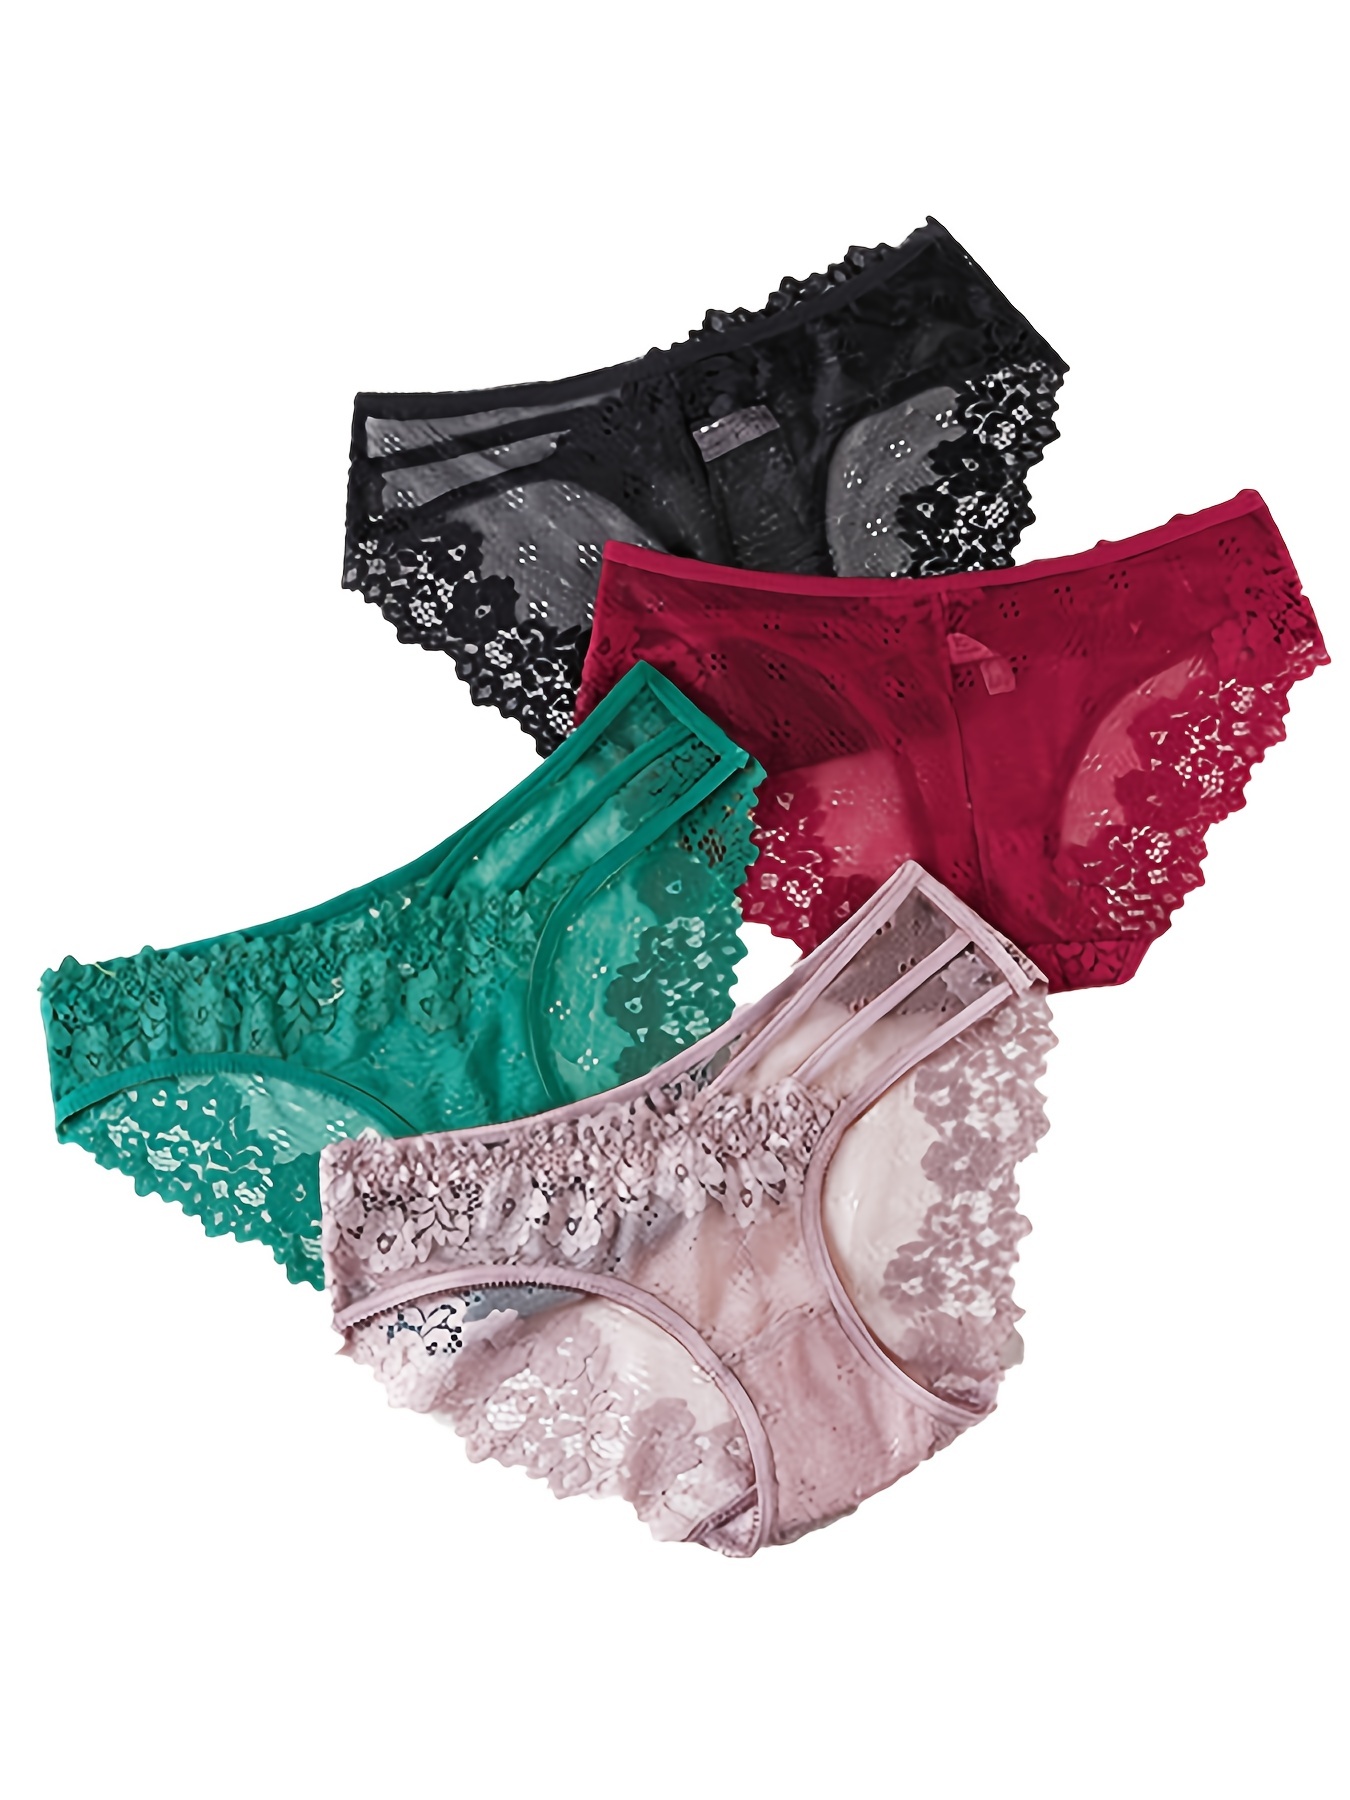 Sexy High-Rise Comfortable Lace Briefs, Stretchy Semi-Sheer French-Cut  Panties, Women's Underwear & Lingerie